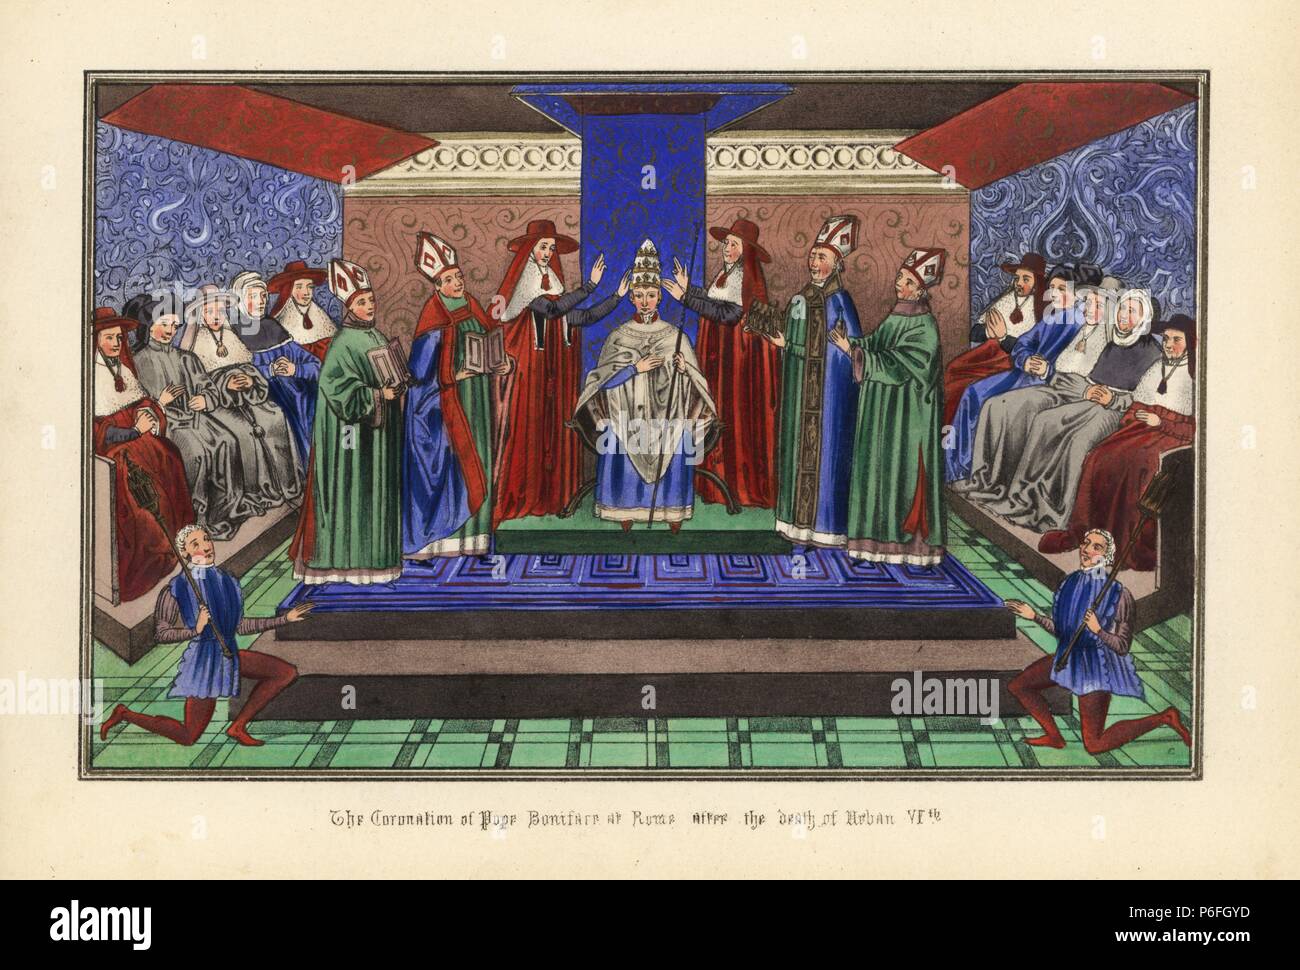 The coronation of Pope Boniface IX at Rome after the death of Pope Urban VI, 1389. Handcoloured lithograph after an illuminated manuscript from Sir John Froissart's 'Chronicles of England, France, Spain and the Adjoining Countries, from the Latter Part of the Reign of Edward II to the Coronation of Henry IV,' George Routledge, London, 1868. Stock Photo